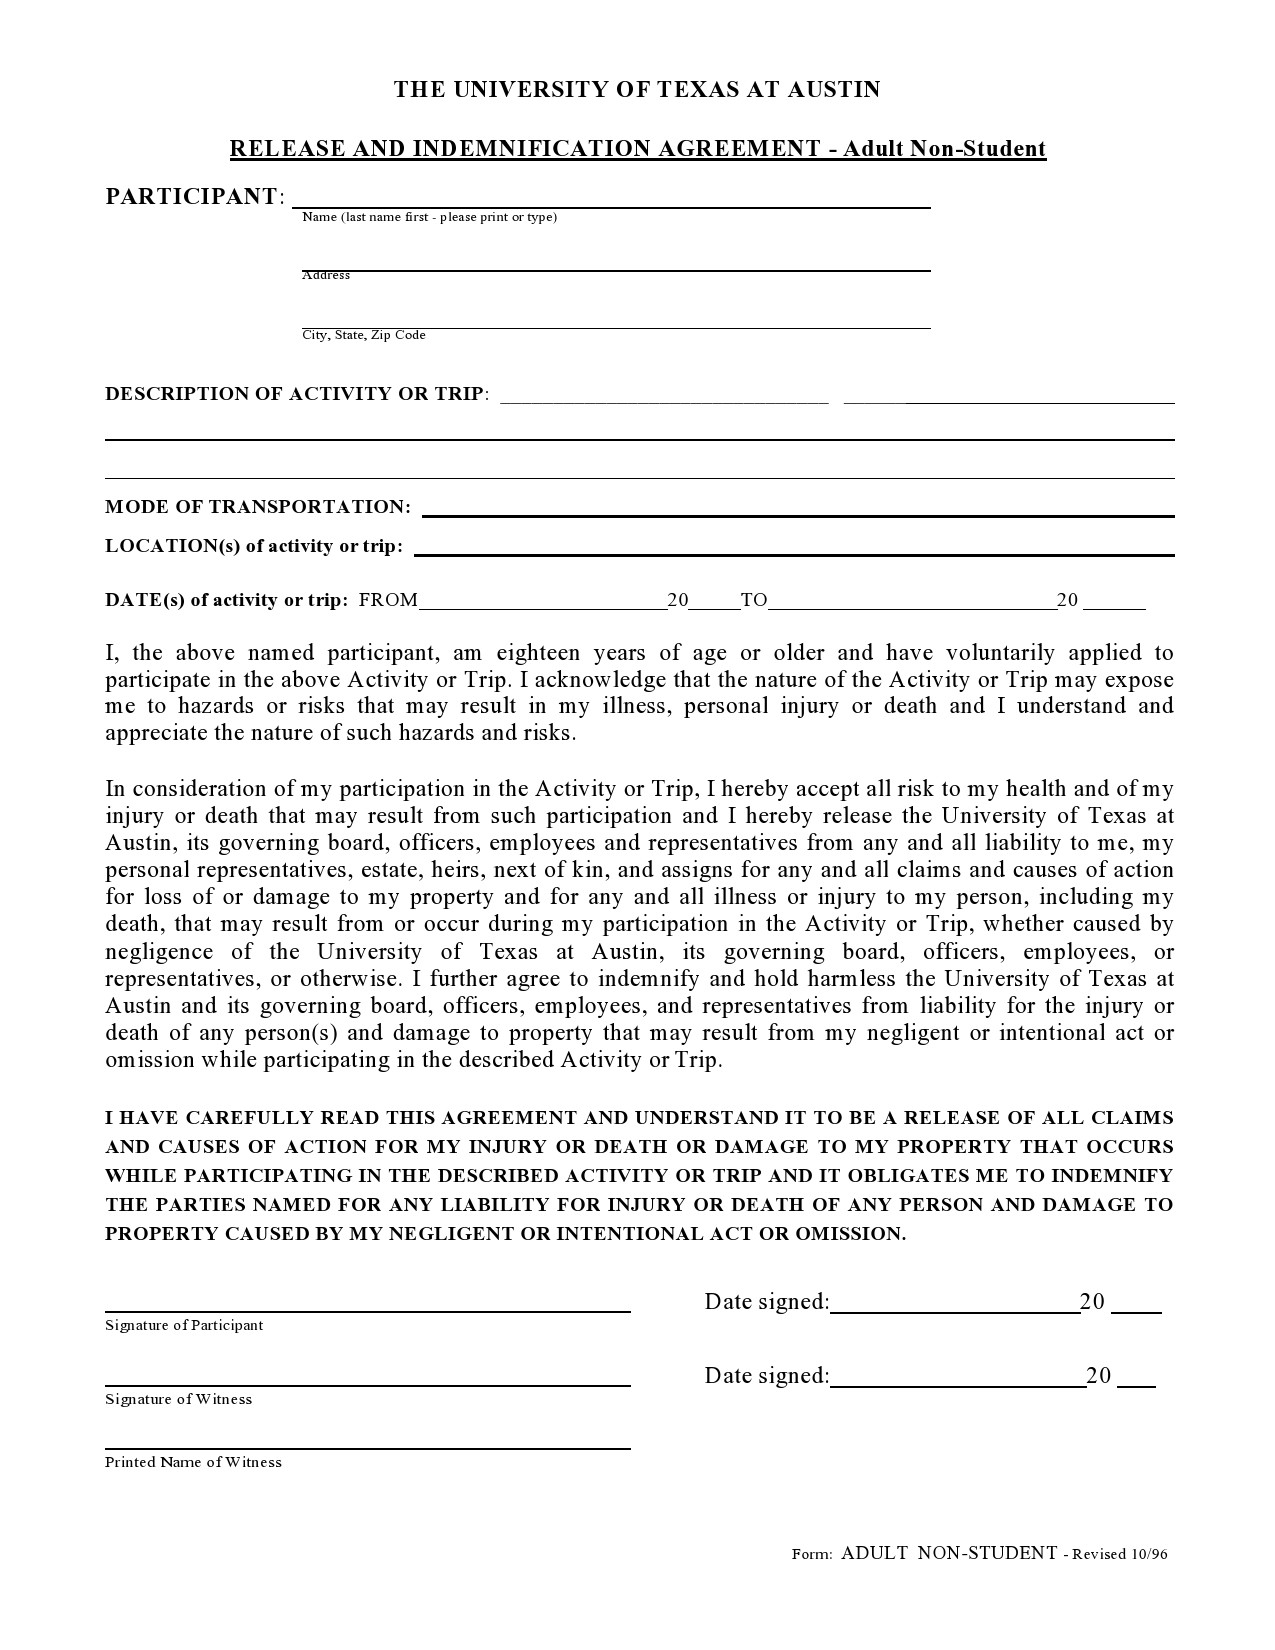 Free indemnification agreement 35